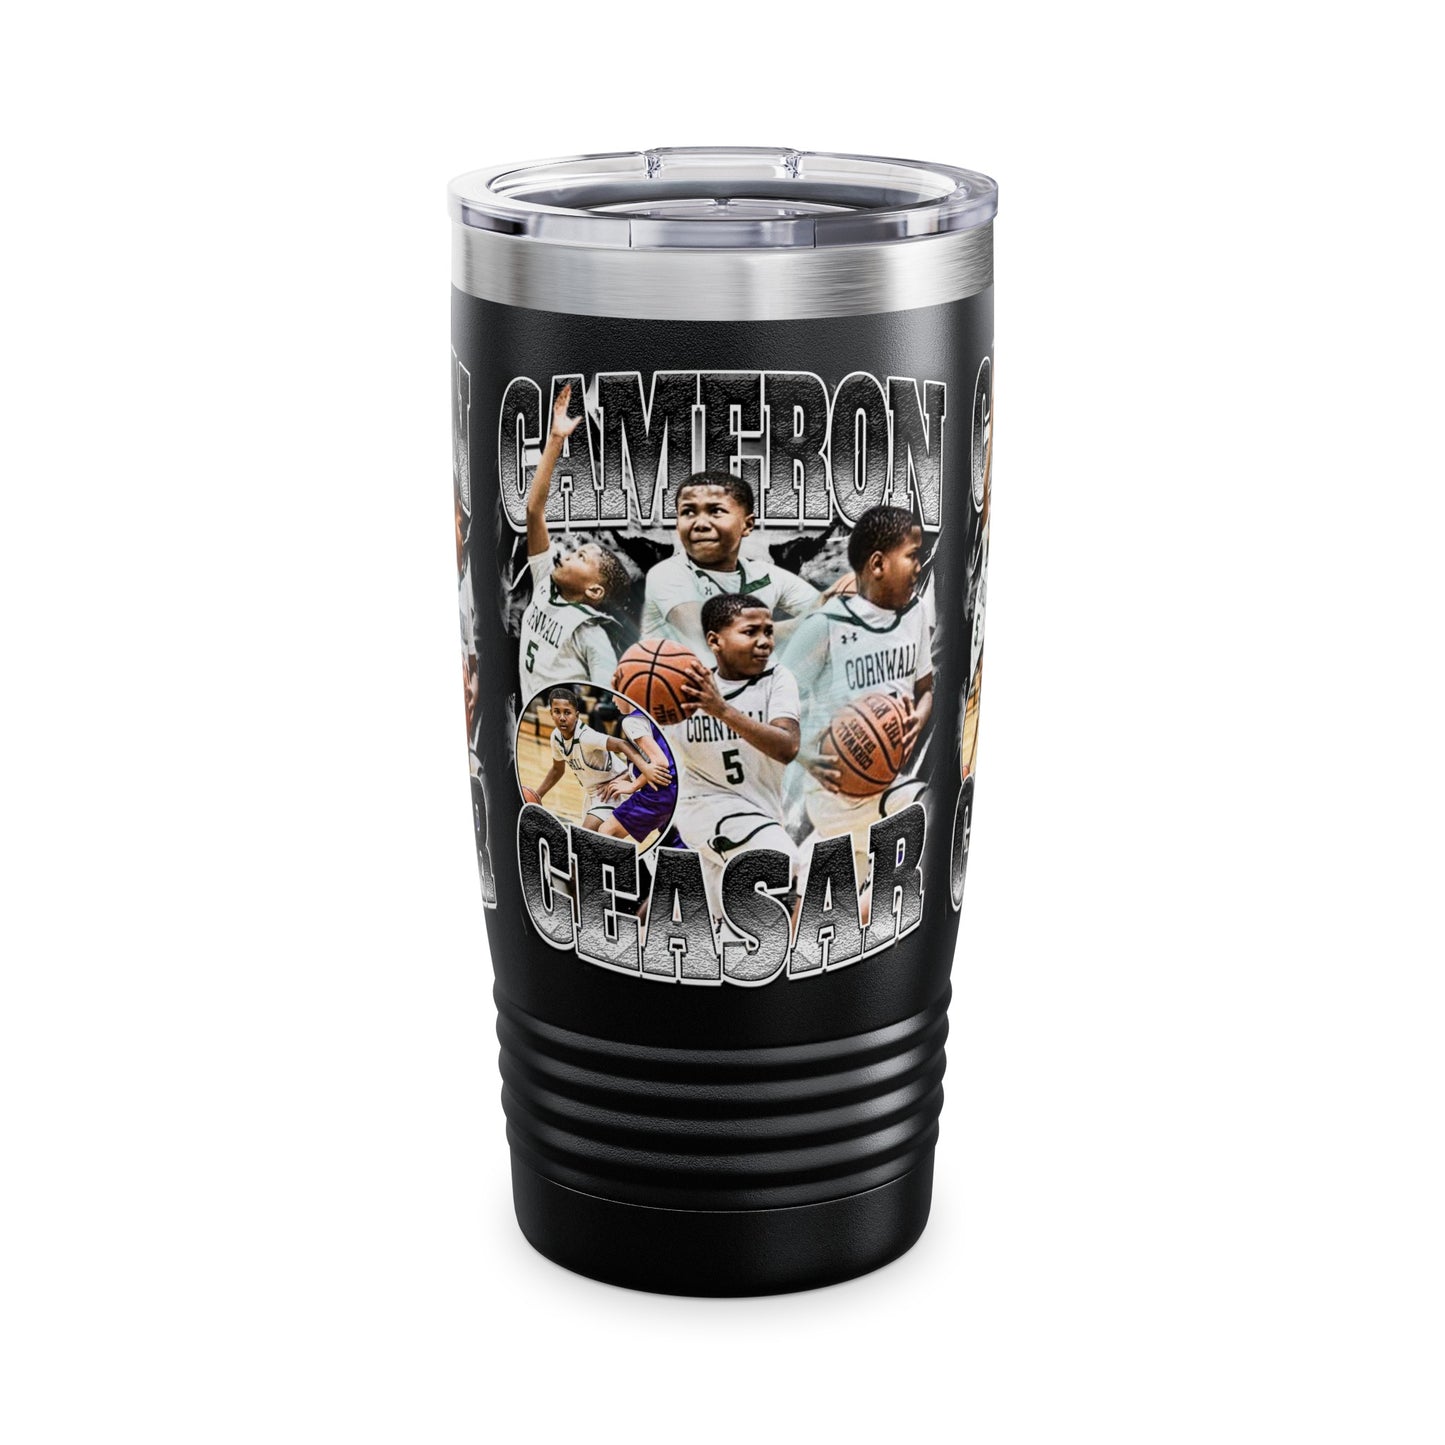 Cameron Ceasar Stainless Steal Tumbler